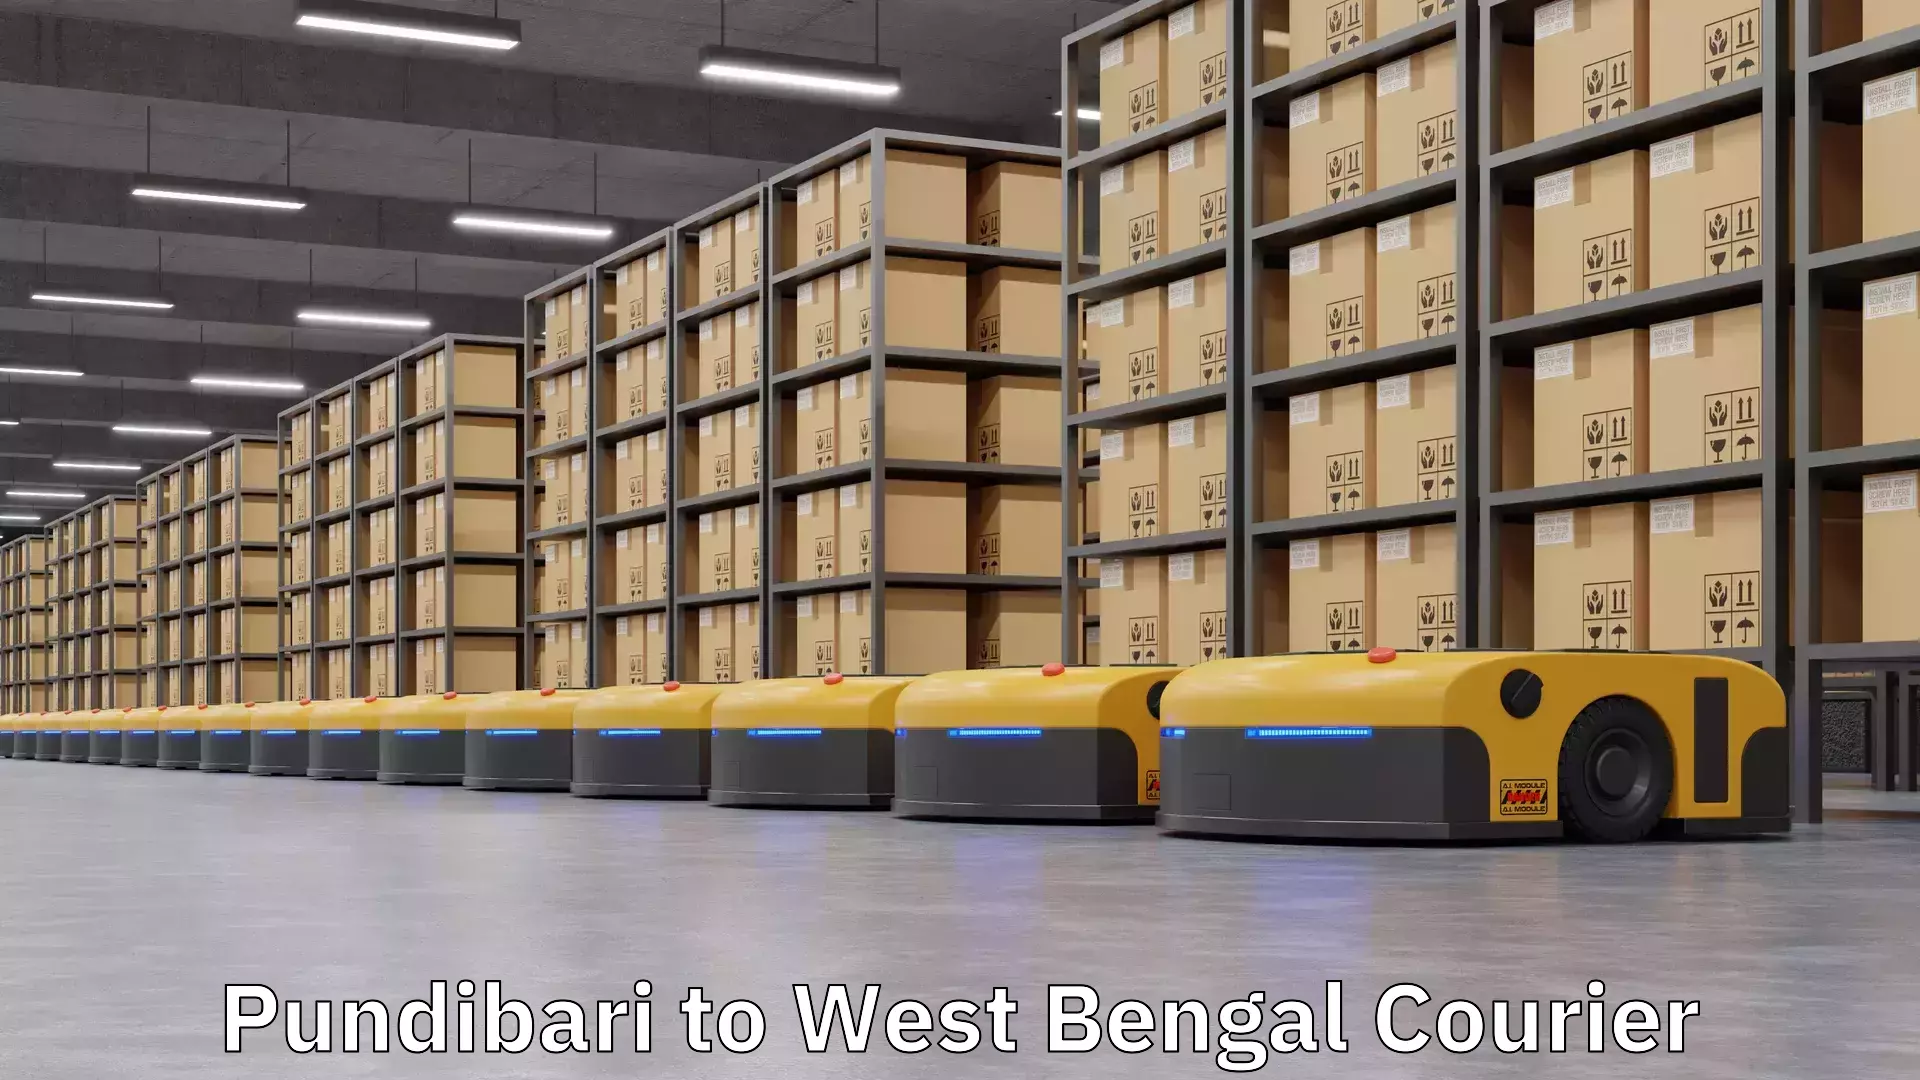 Courier service efficiency Pundibari to West Bengal